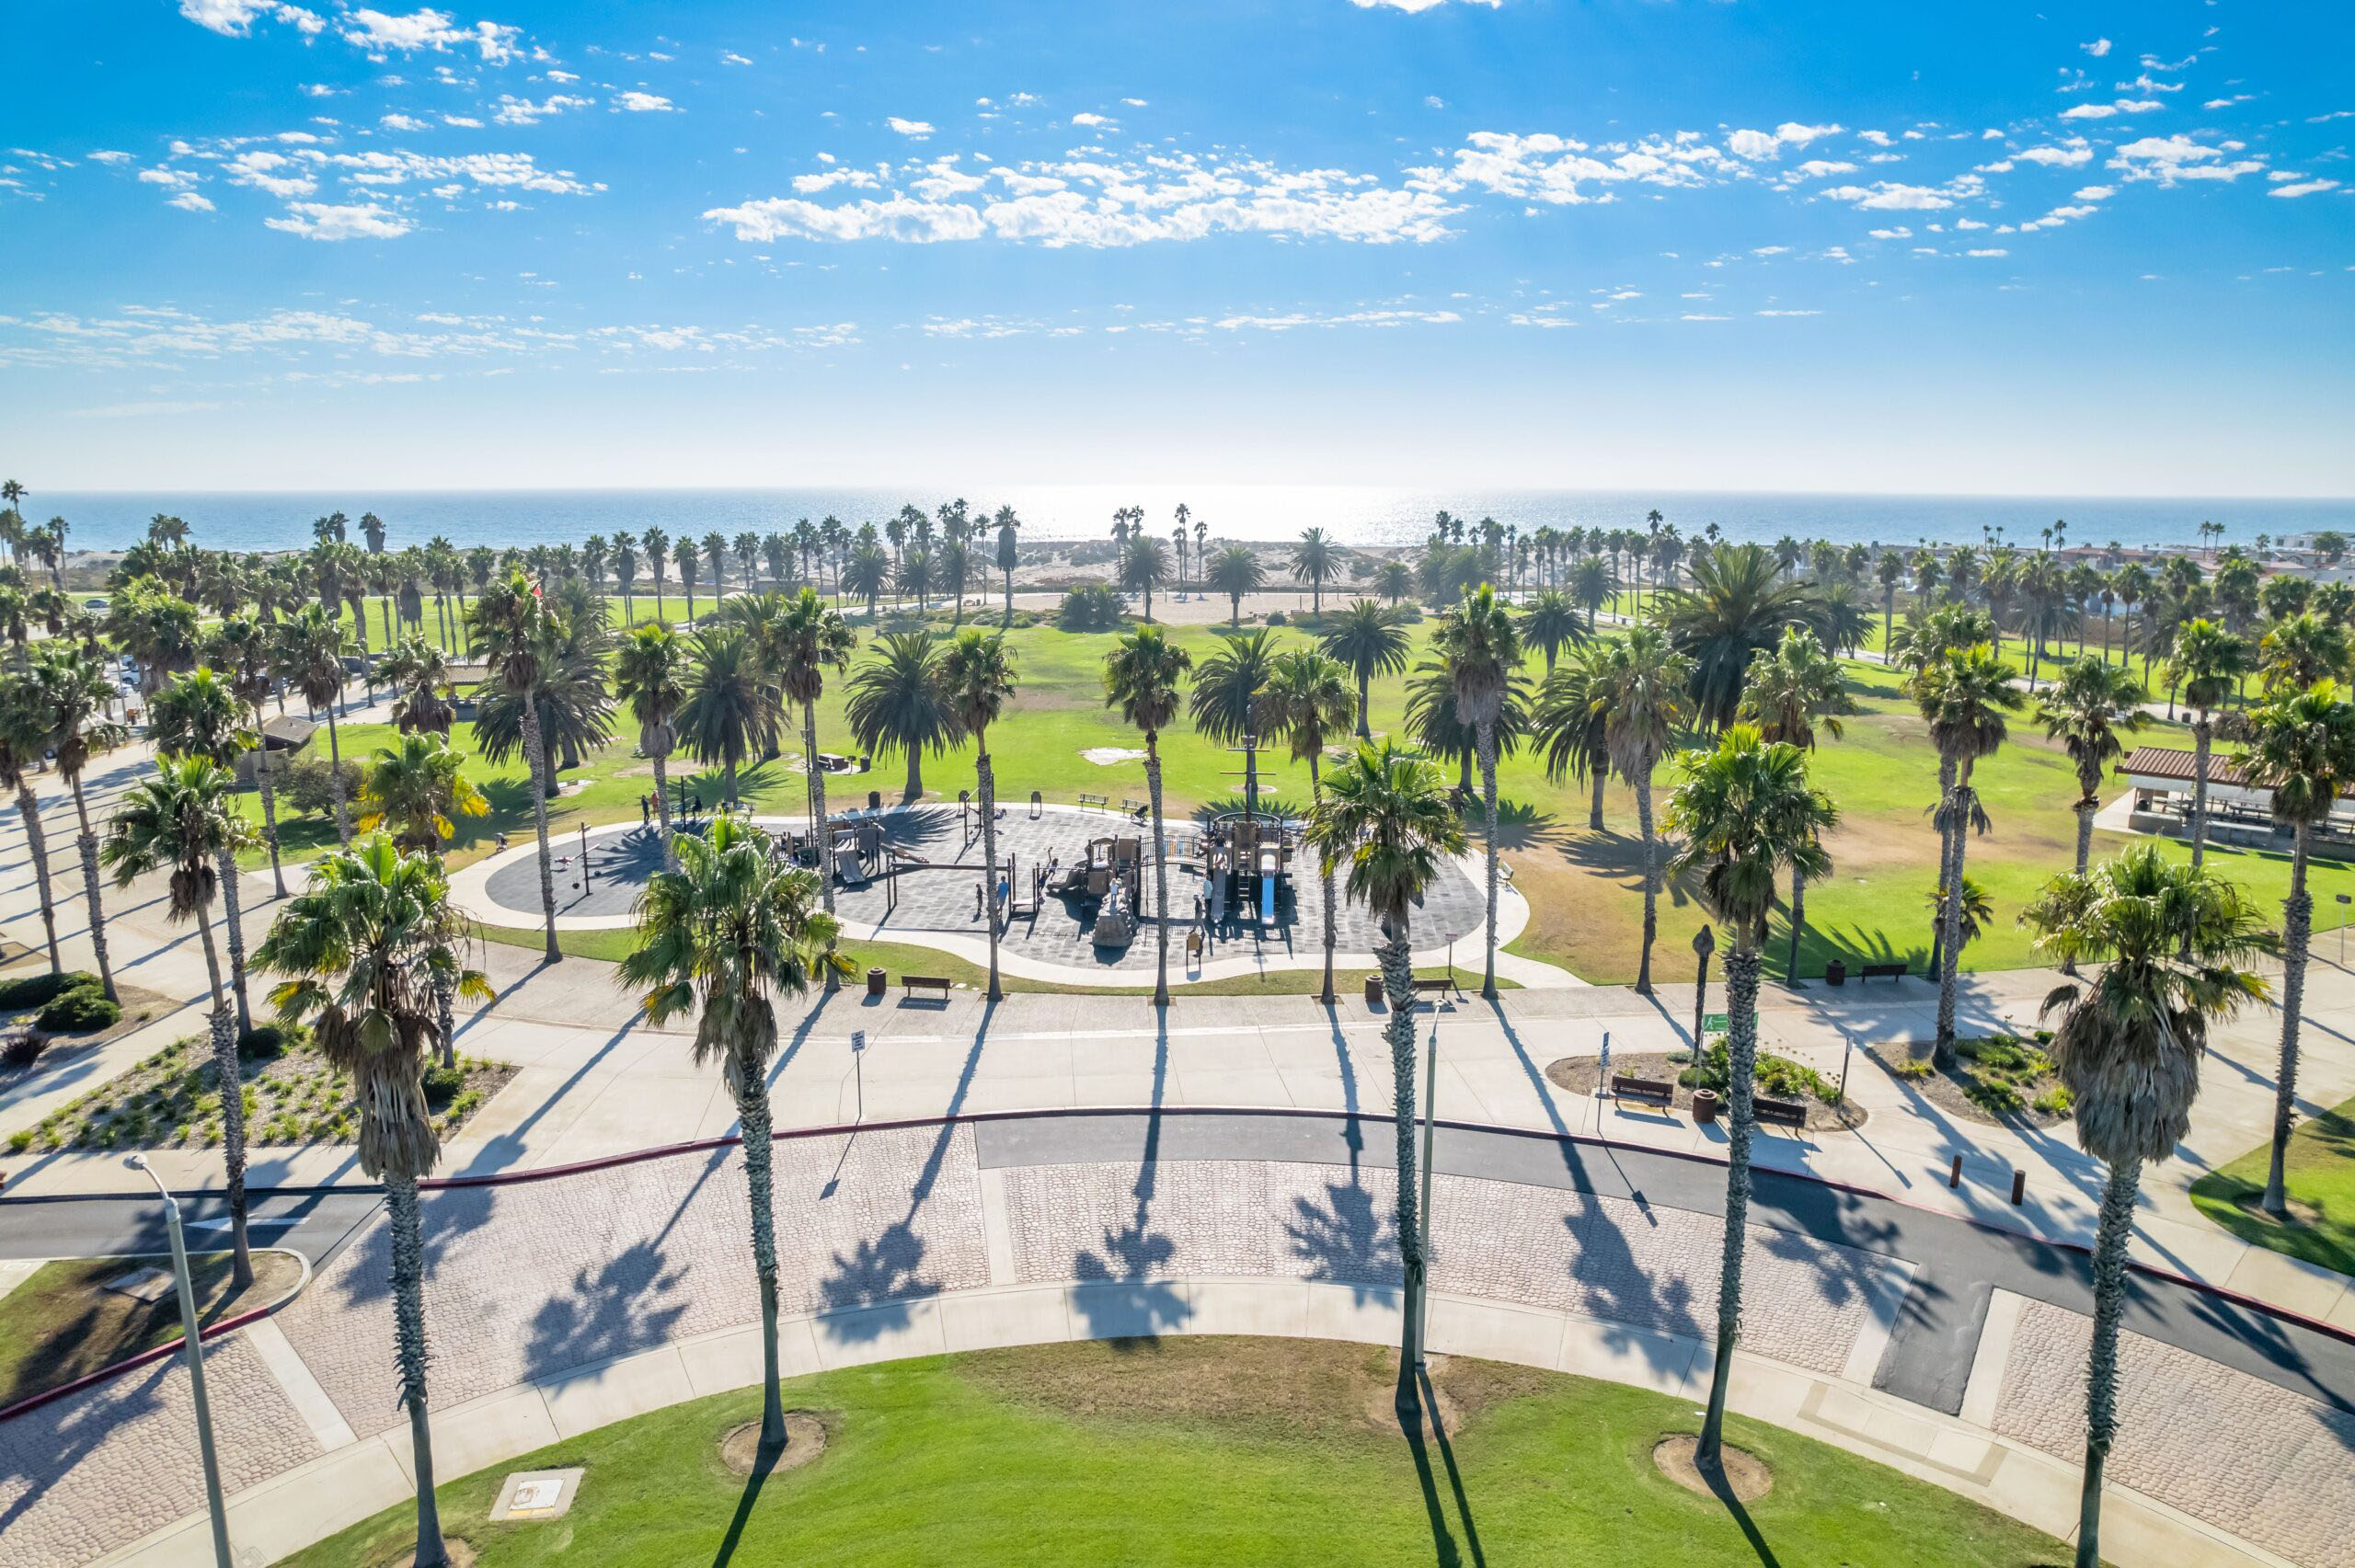 Drone shot of Oxnard Beach Park looking off into the beach and ocean.